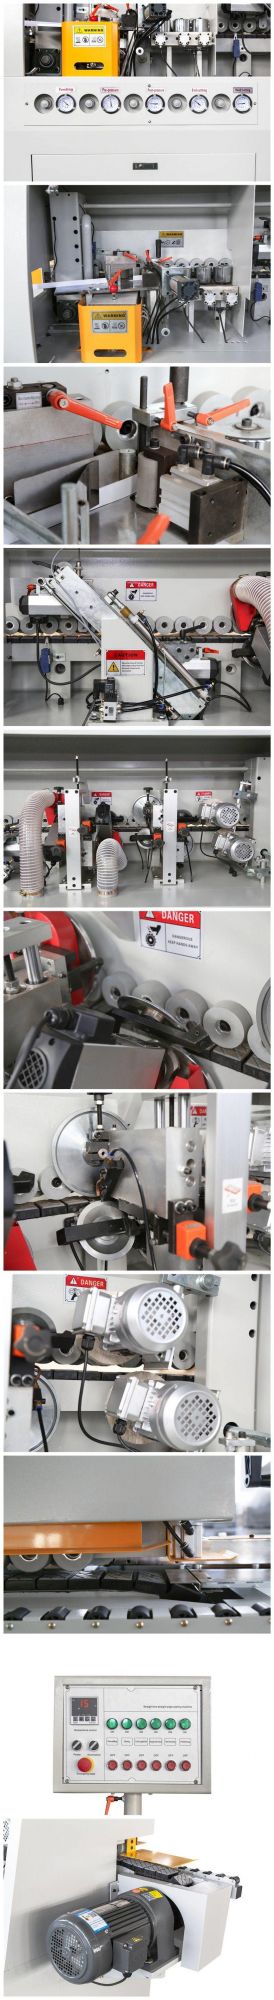 Zd700 Fully Automatic Edge Banding Machine with Pre-Milling 7 Functions